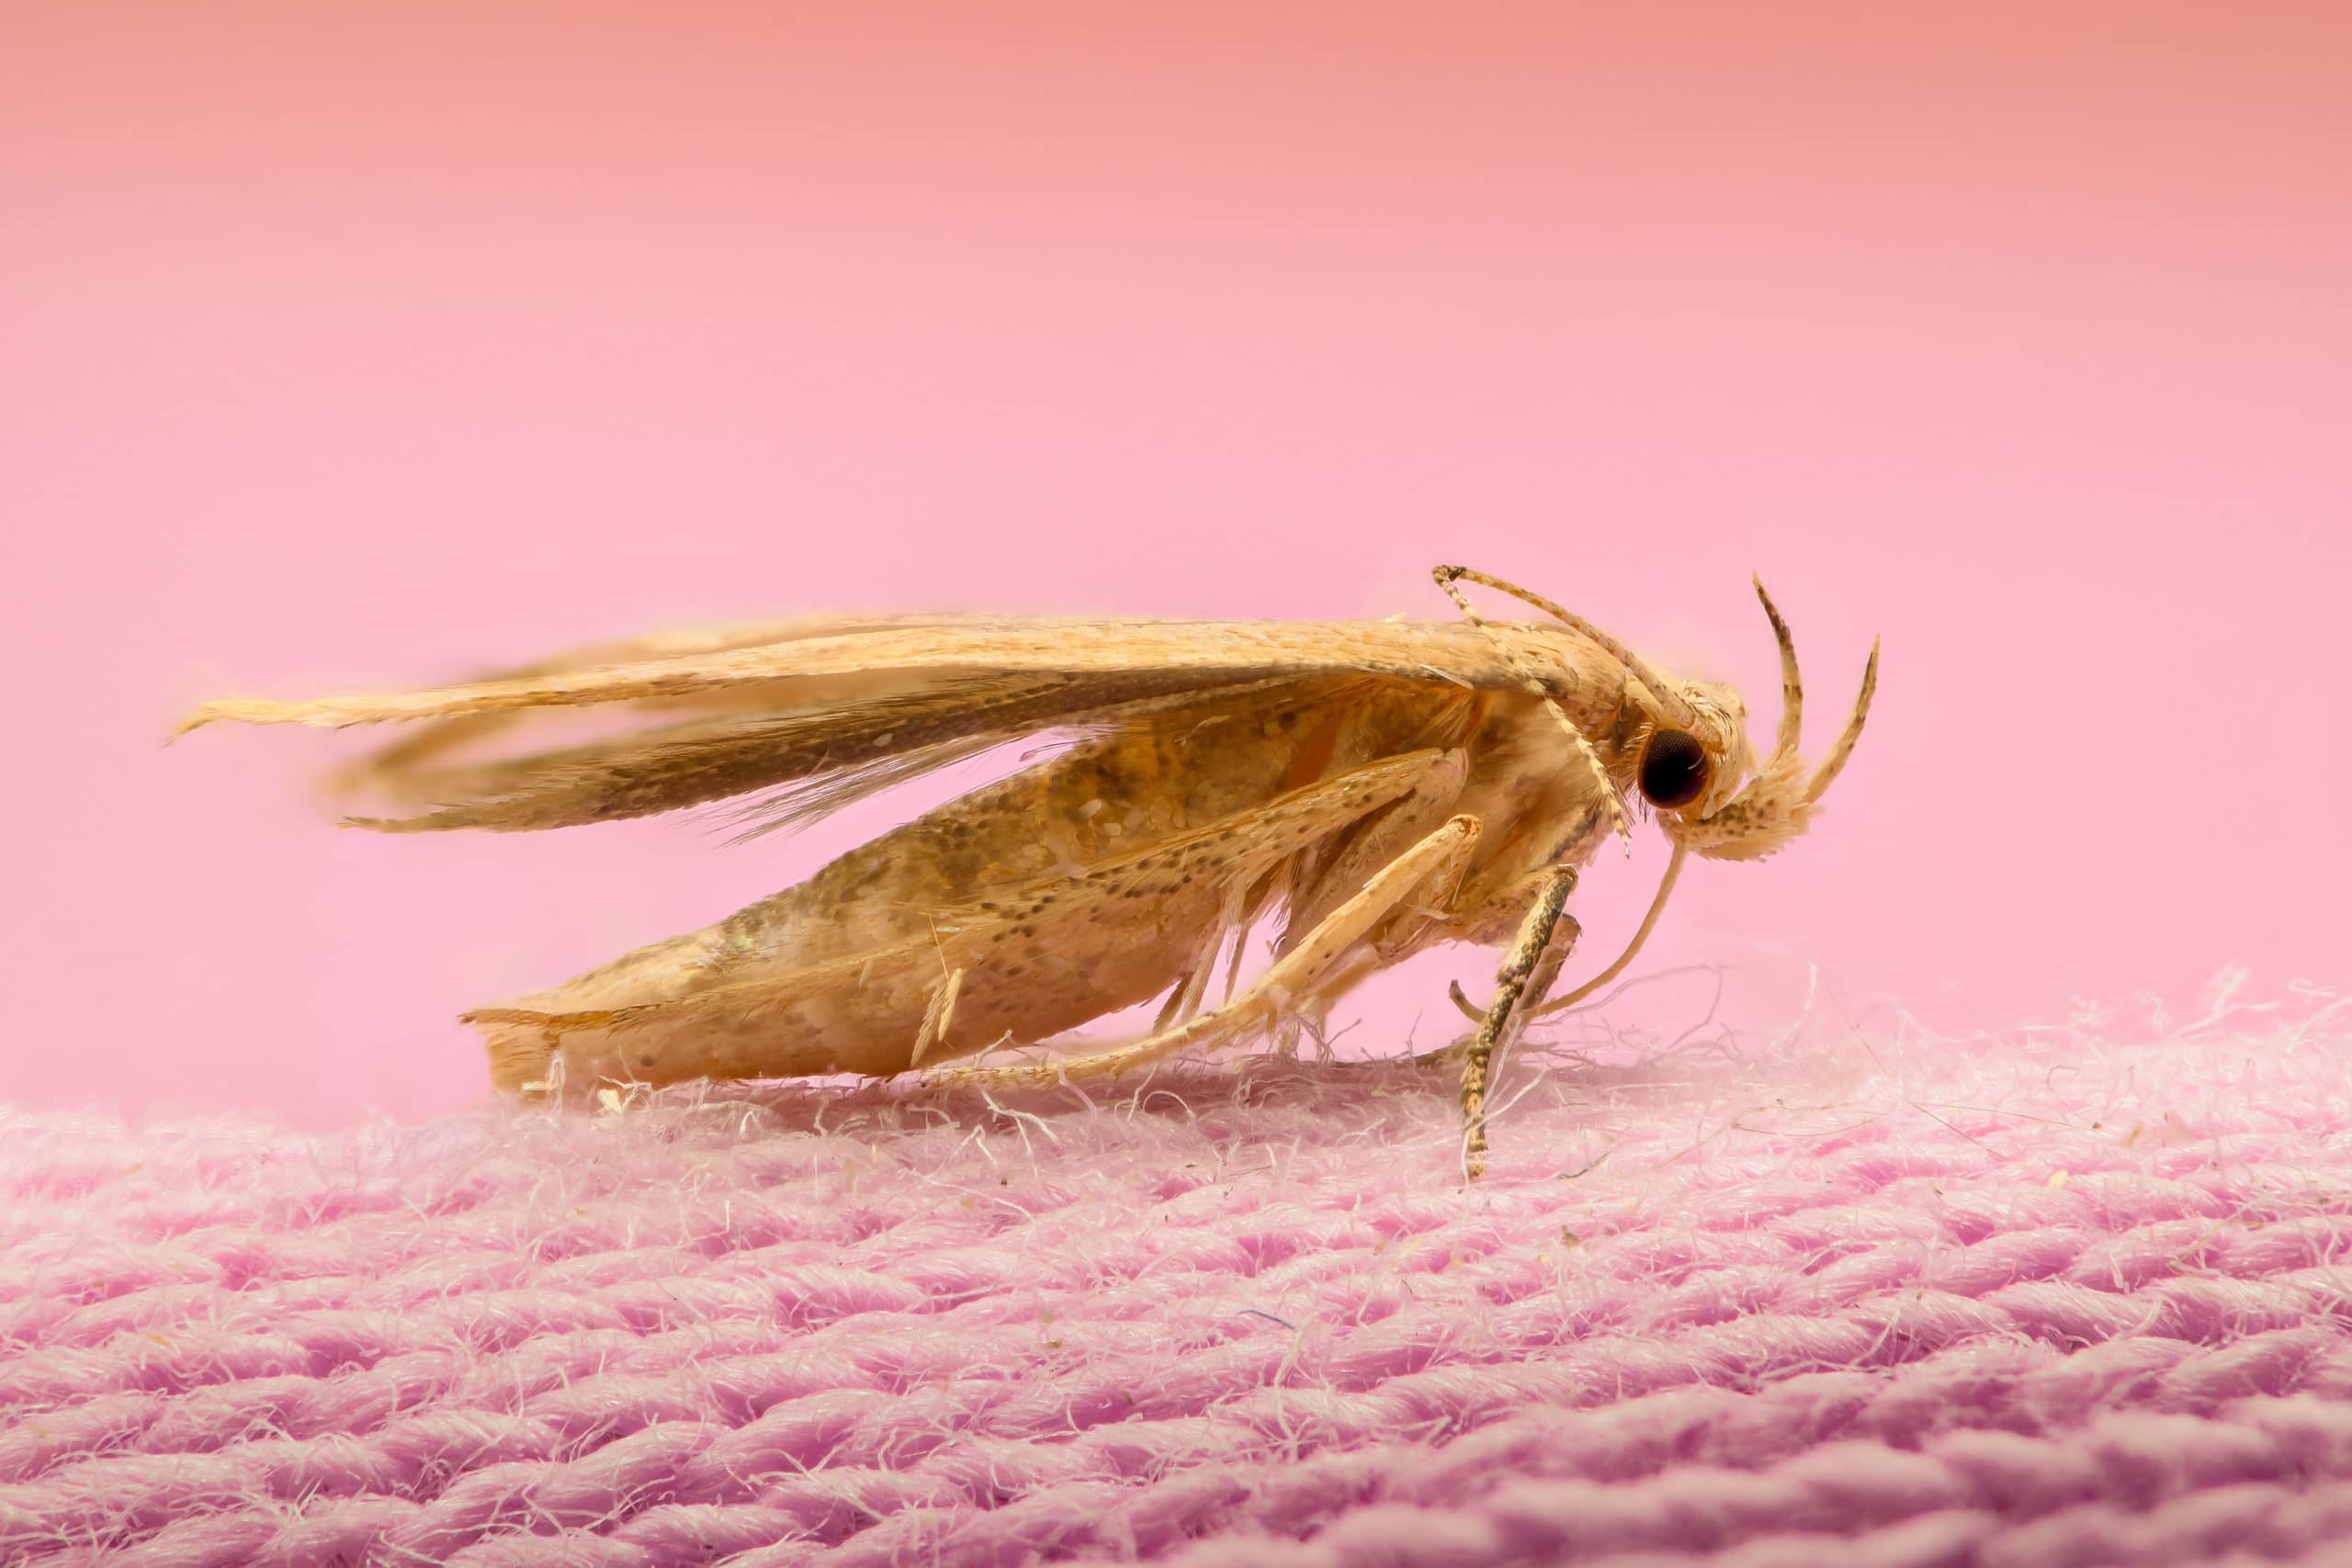 a moth on a pink, knit piece of clothing